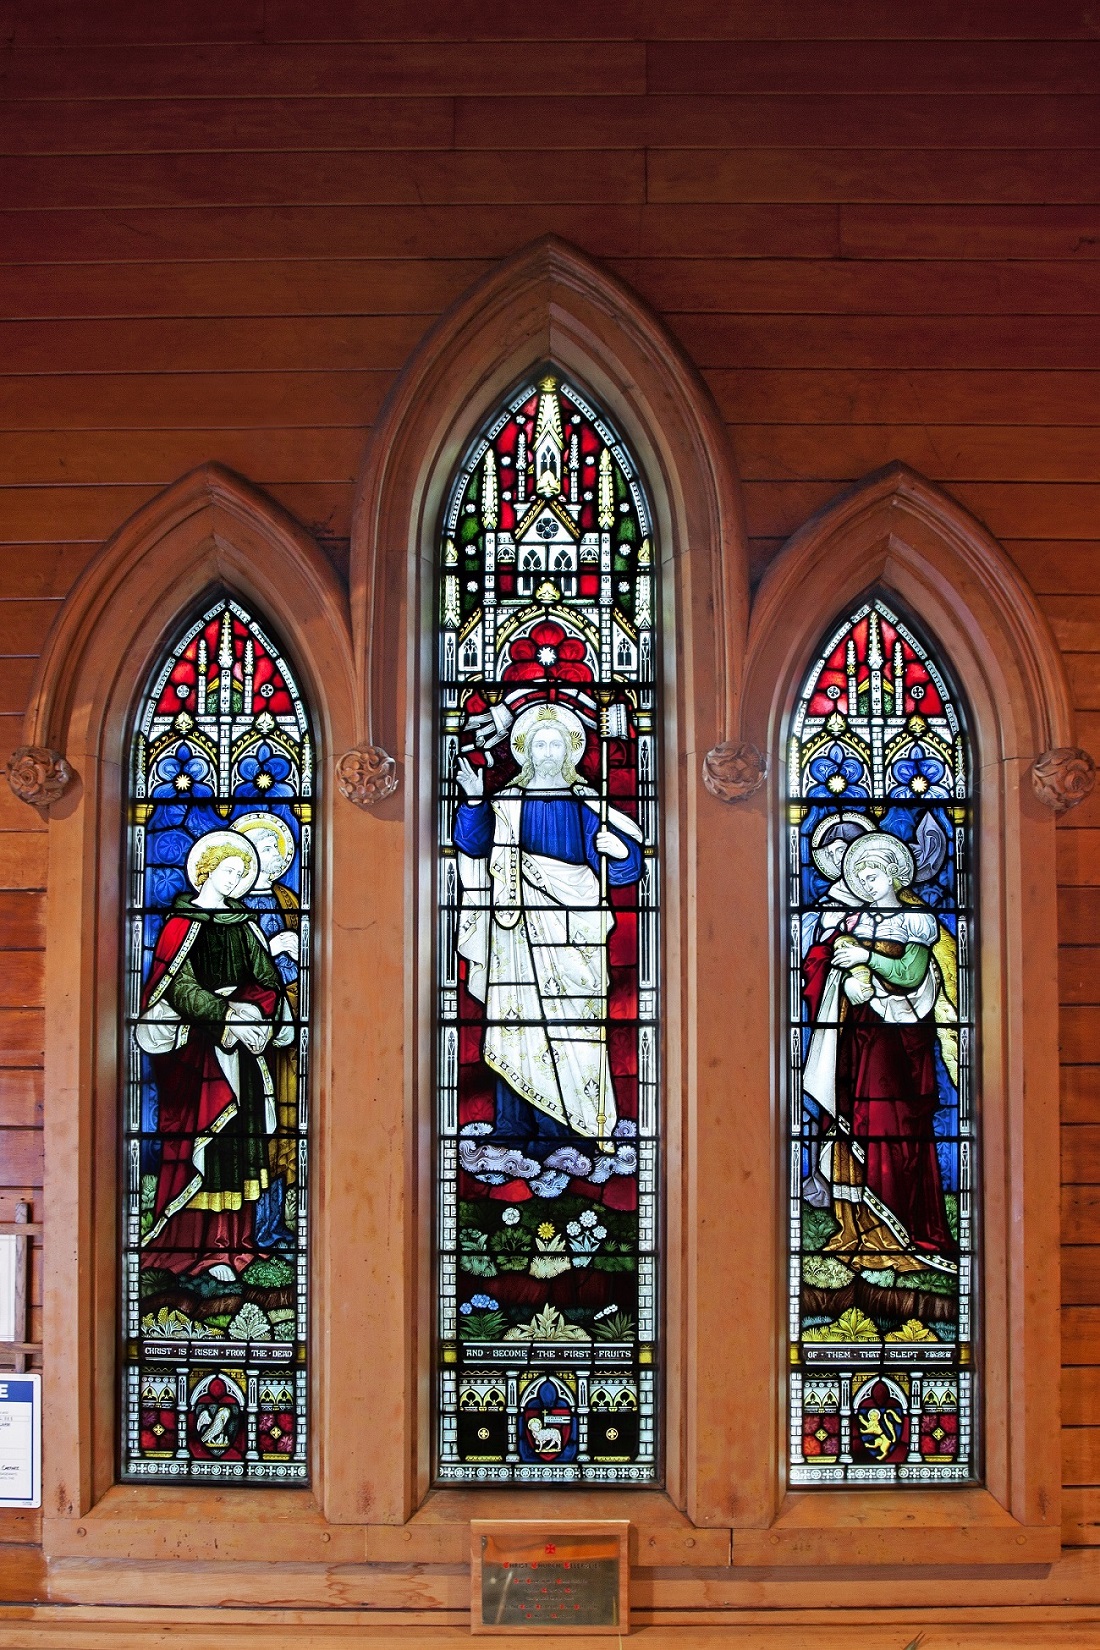 Historic church windows get new life thanks to heritage grant - OurAuckland